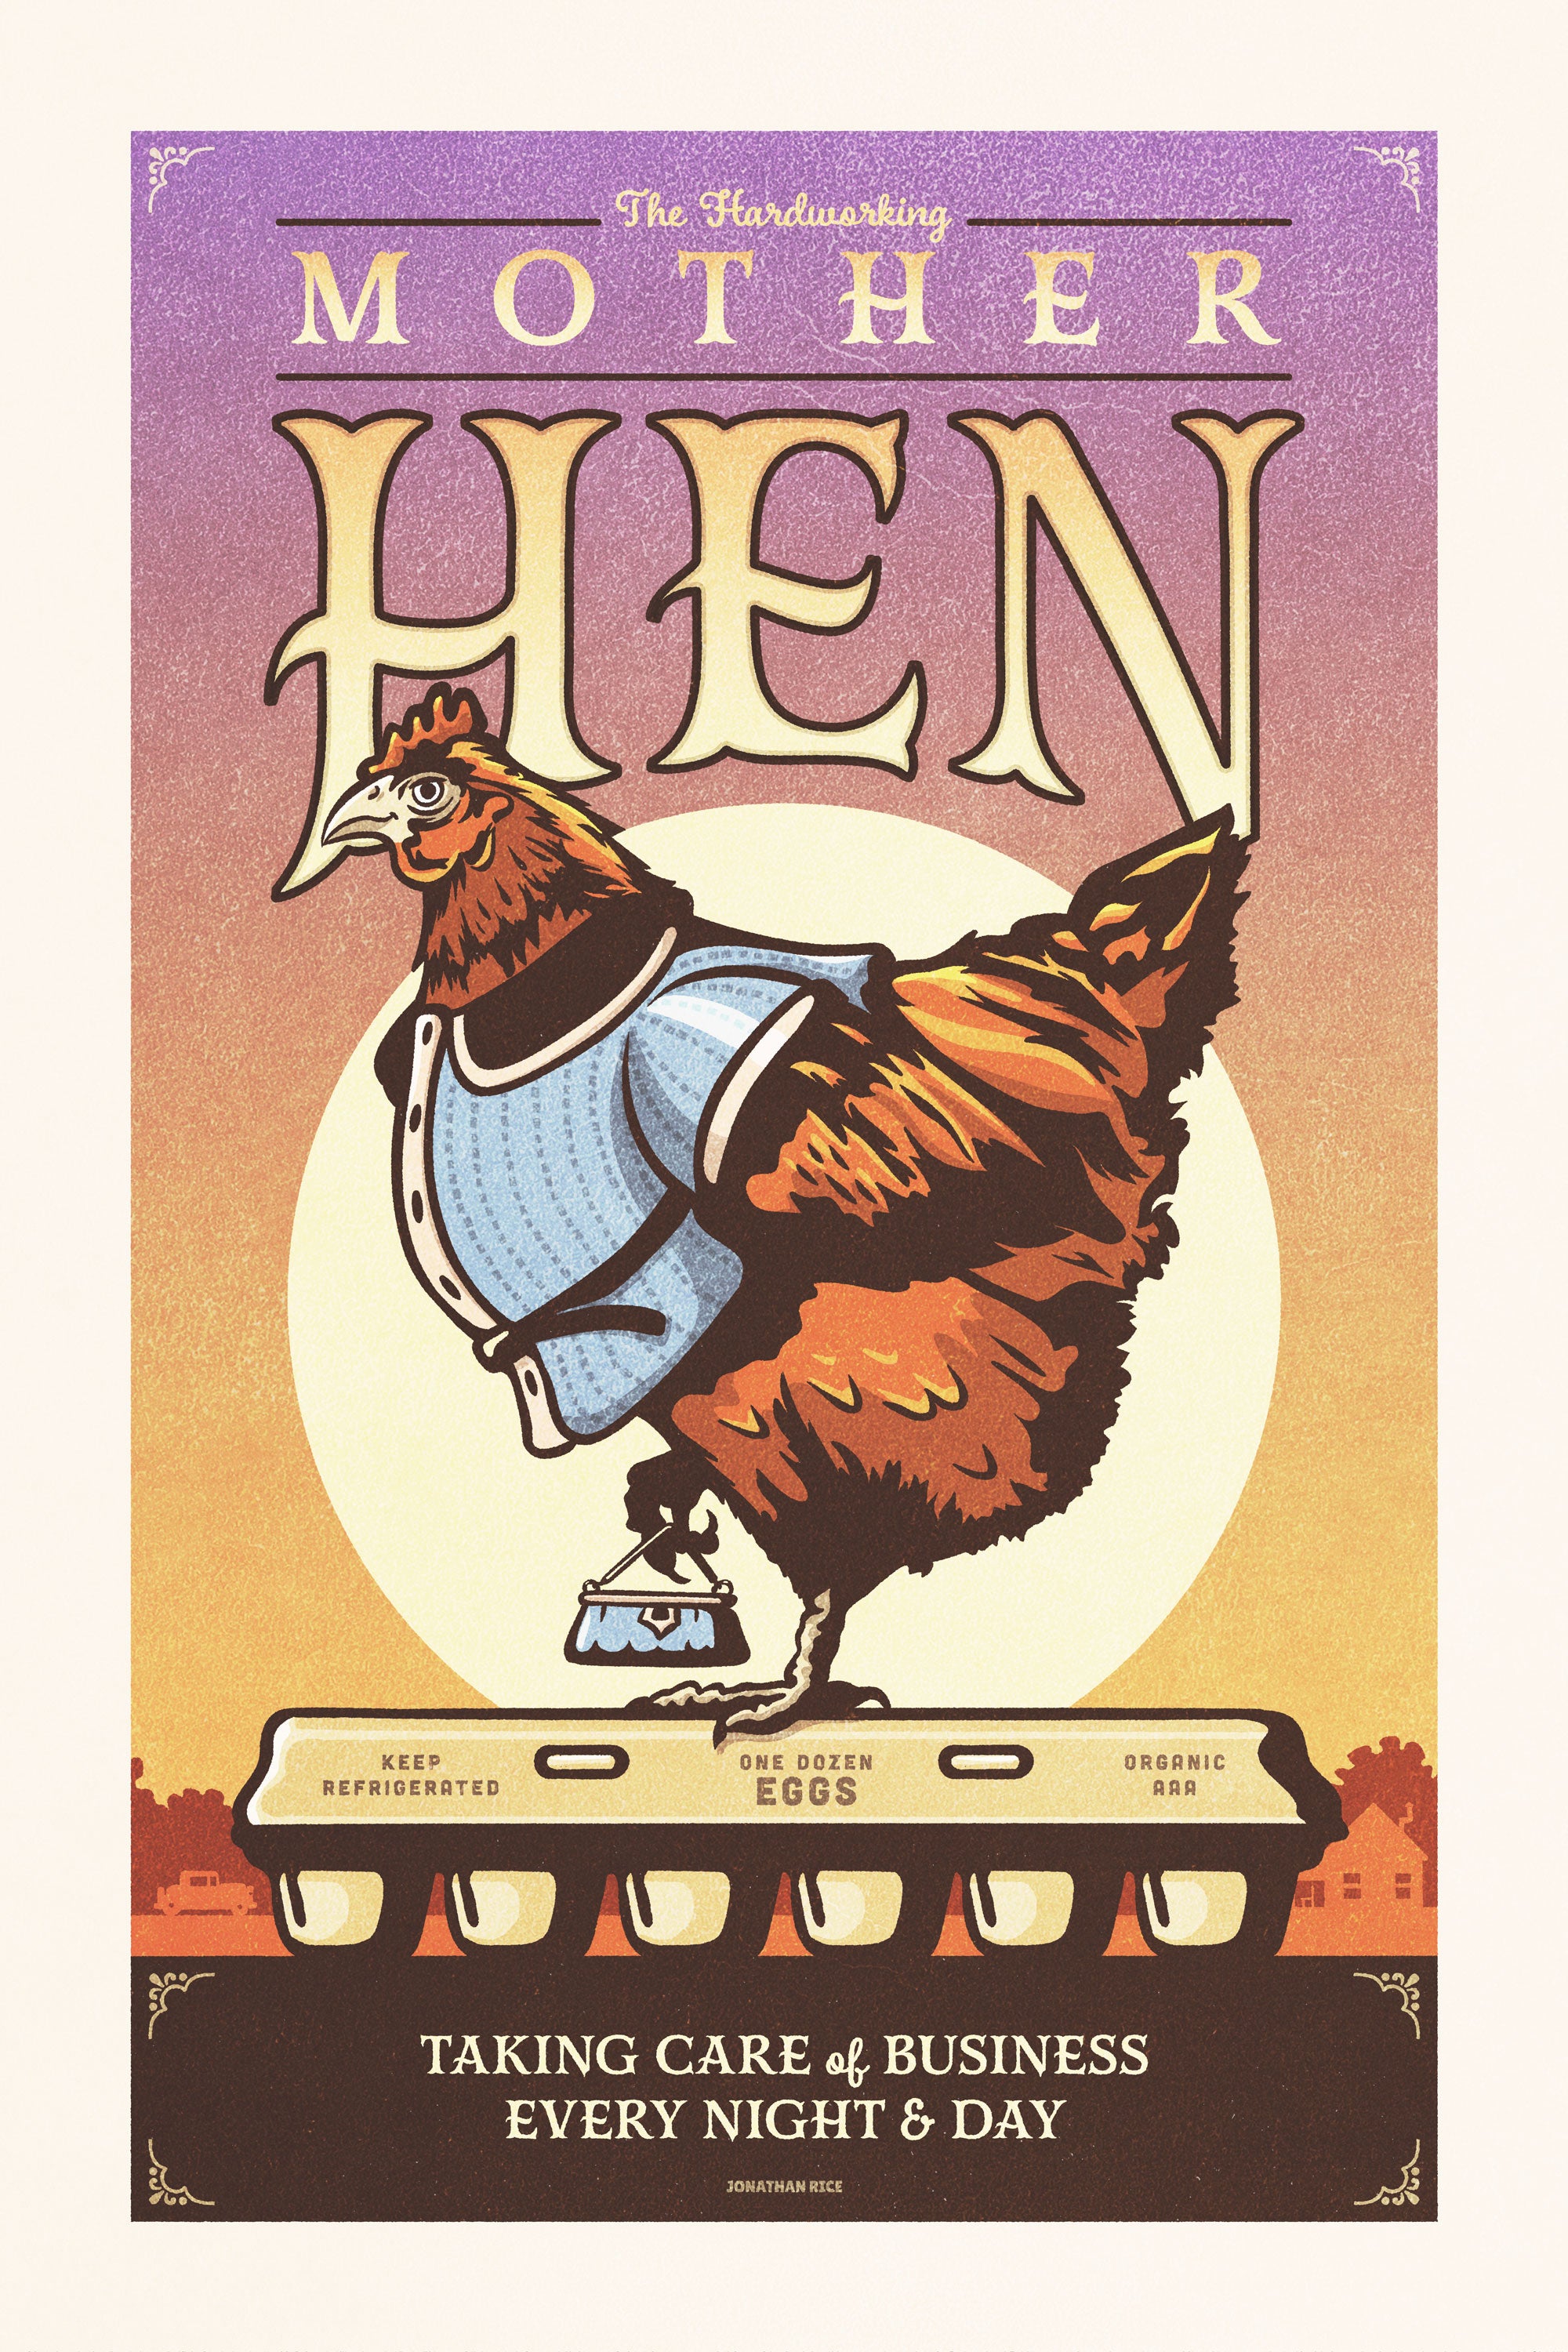 Retro style giclée art print of a Mother Hen resplendent in her lovely blouse, holding her purse and standing on a carton of one dozed eggs. It has dusty colors, textures, and ornate typography, with a headline that says “The Hardworking Mother Hen”.  At the bottom the type says “Taking Care of Business Every Night & Day.”